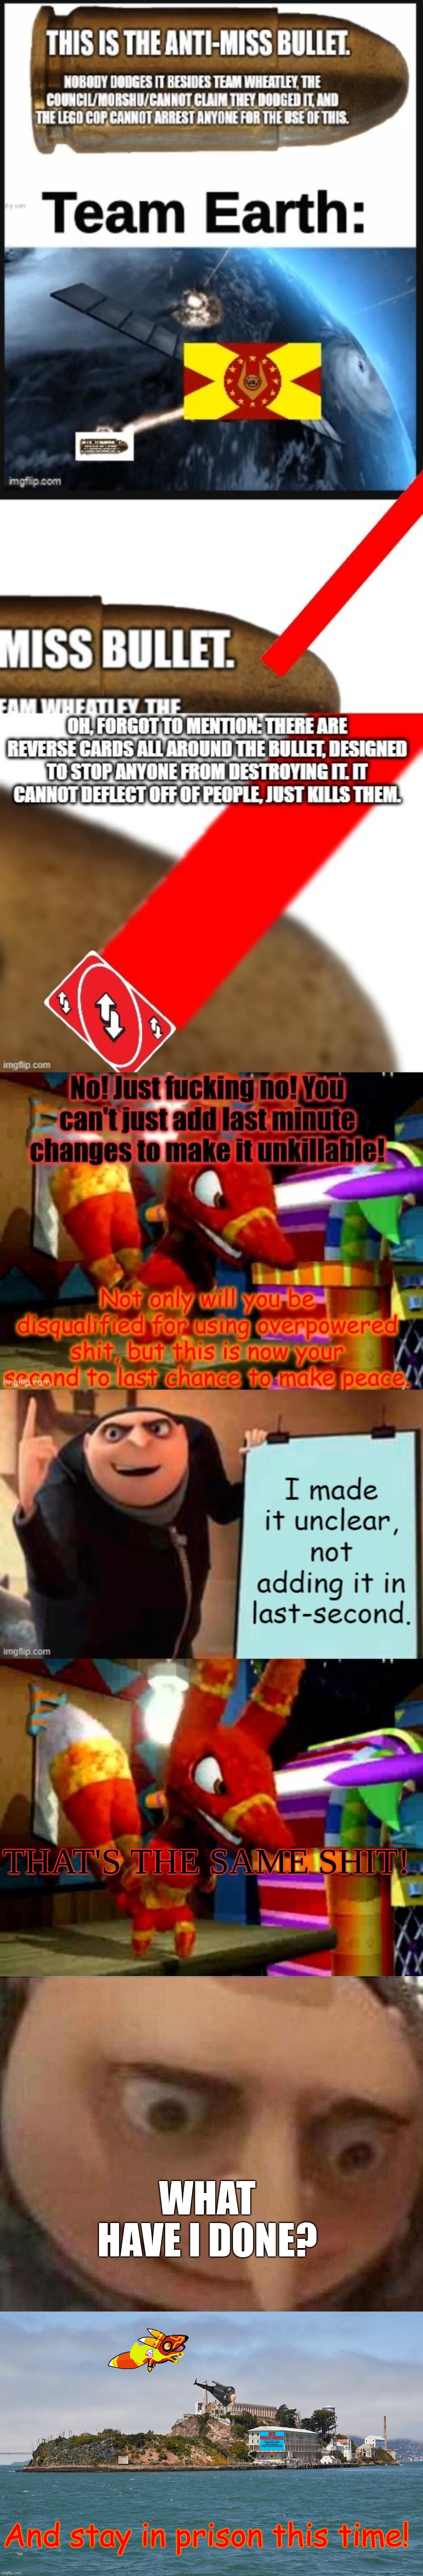 great job, you got it wrong again | THAT'S THE SAME SHIT! WHAT HAVE I DONE? And stay in prison this time! | image tagged in angry pretztail,gru meme,alcatraz | made w/ Imgflip meme maker